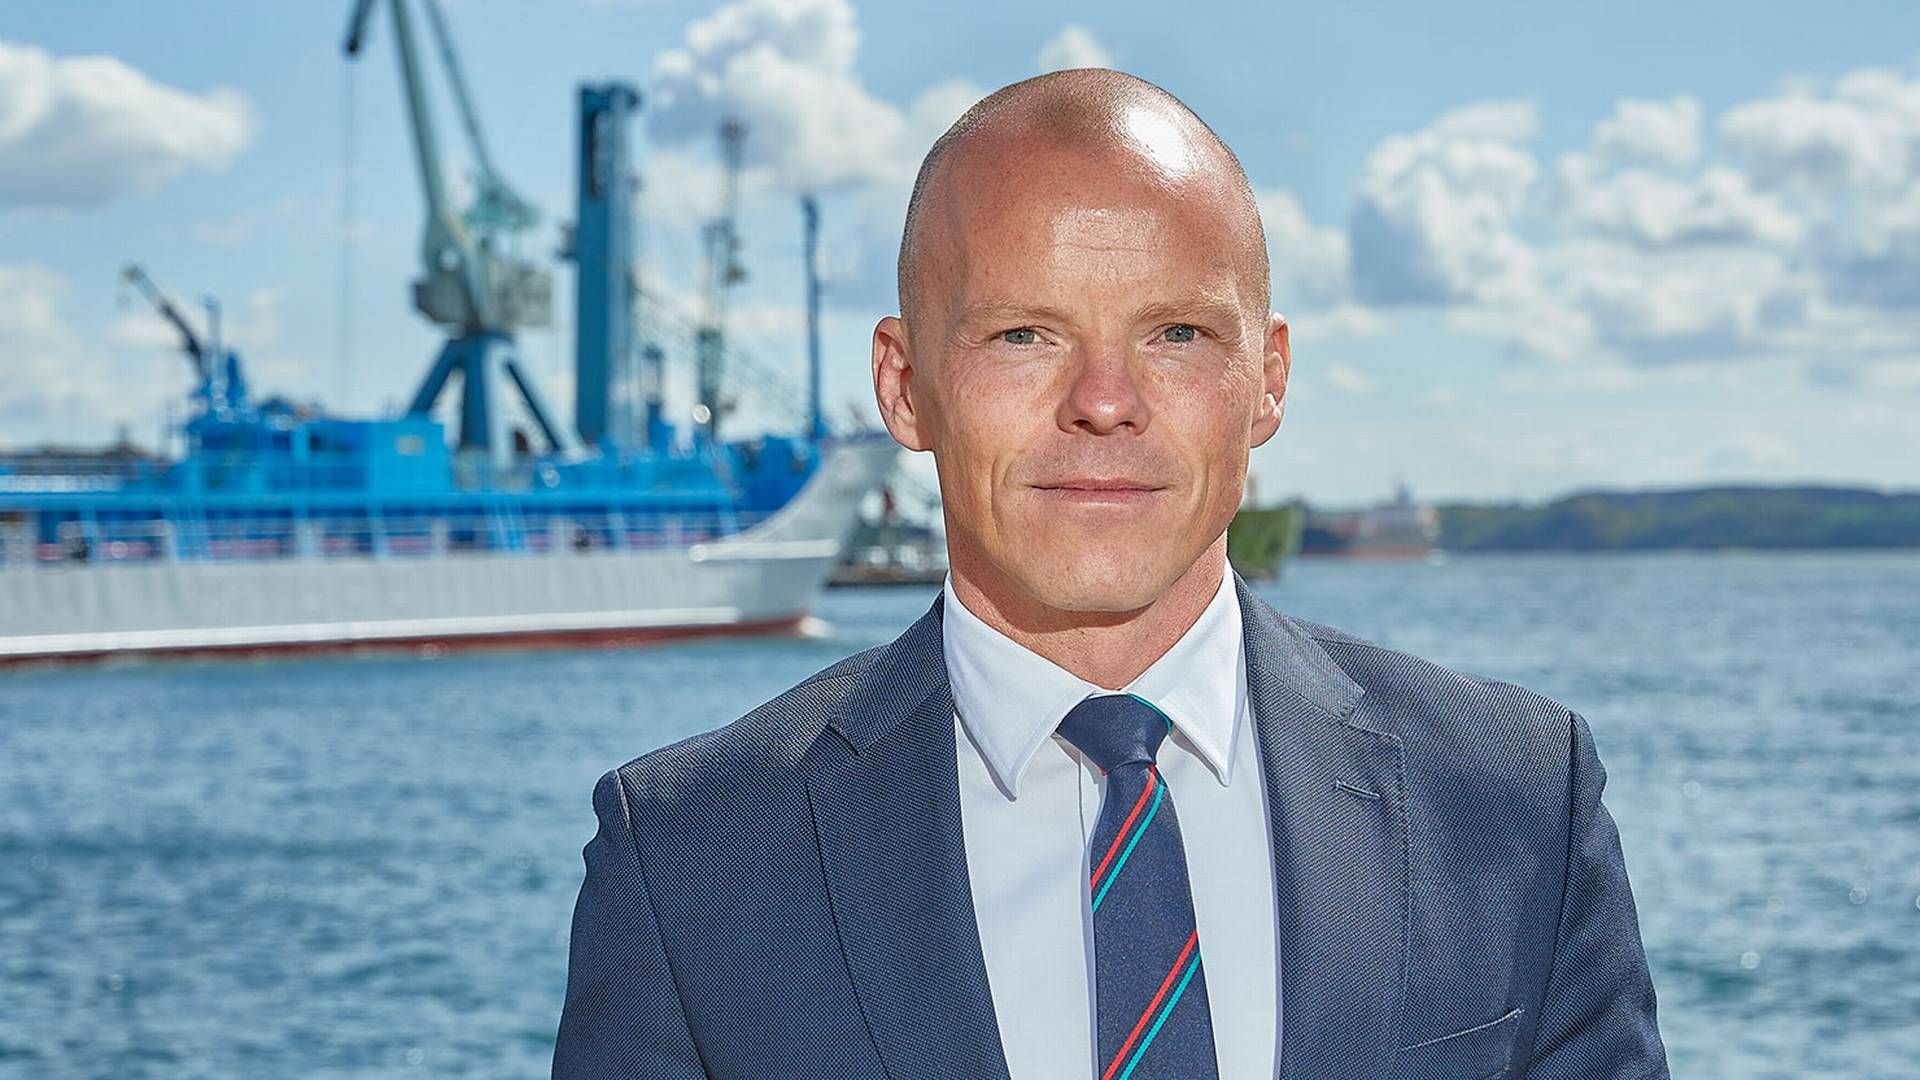 Svend Stenberg Mølholt has previously worked at Maersk's former logistics company Damco. He joined Monjasa in 2015 | Photo: Monjasa/PR